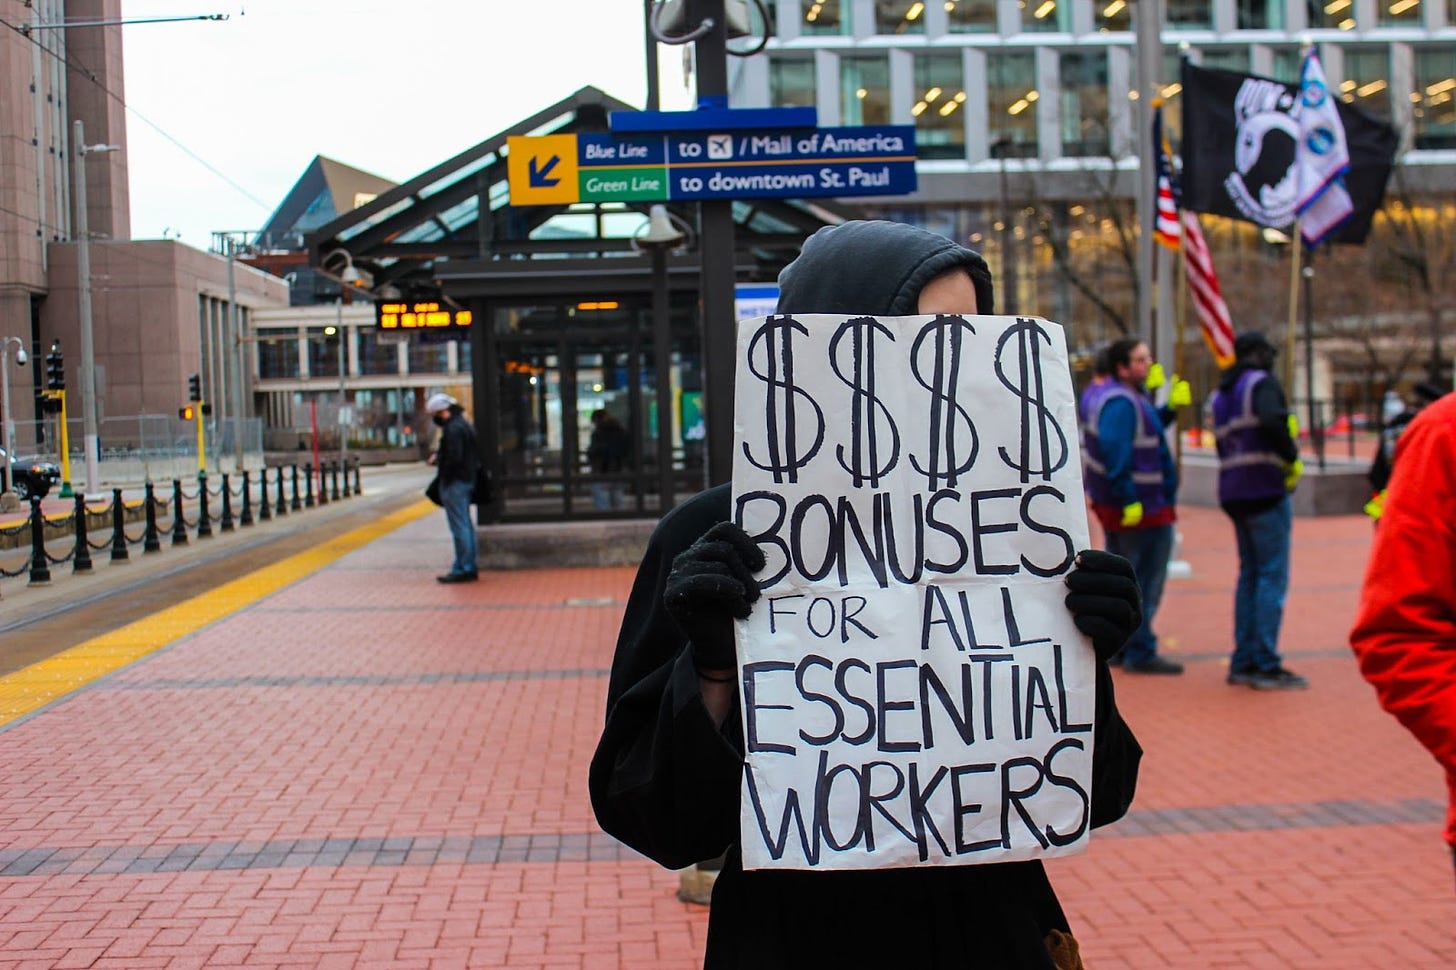 person in black hoodie standing in front of light rail station downtonw with a sign covering face reading "$$$$ bonuses for all essential workers"